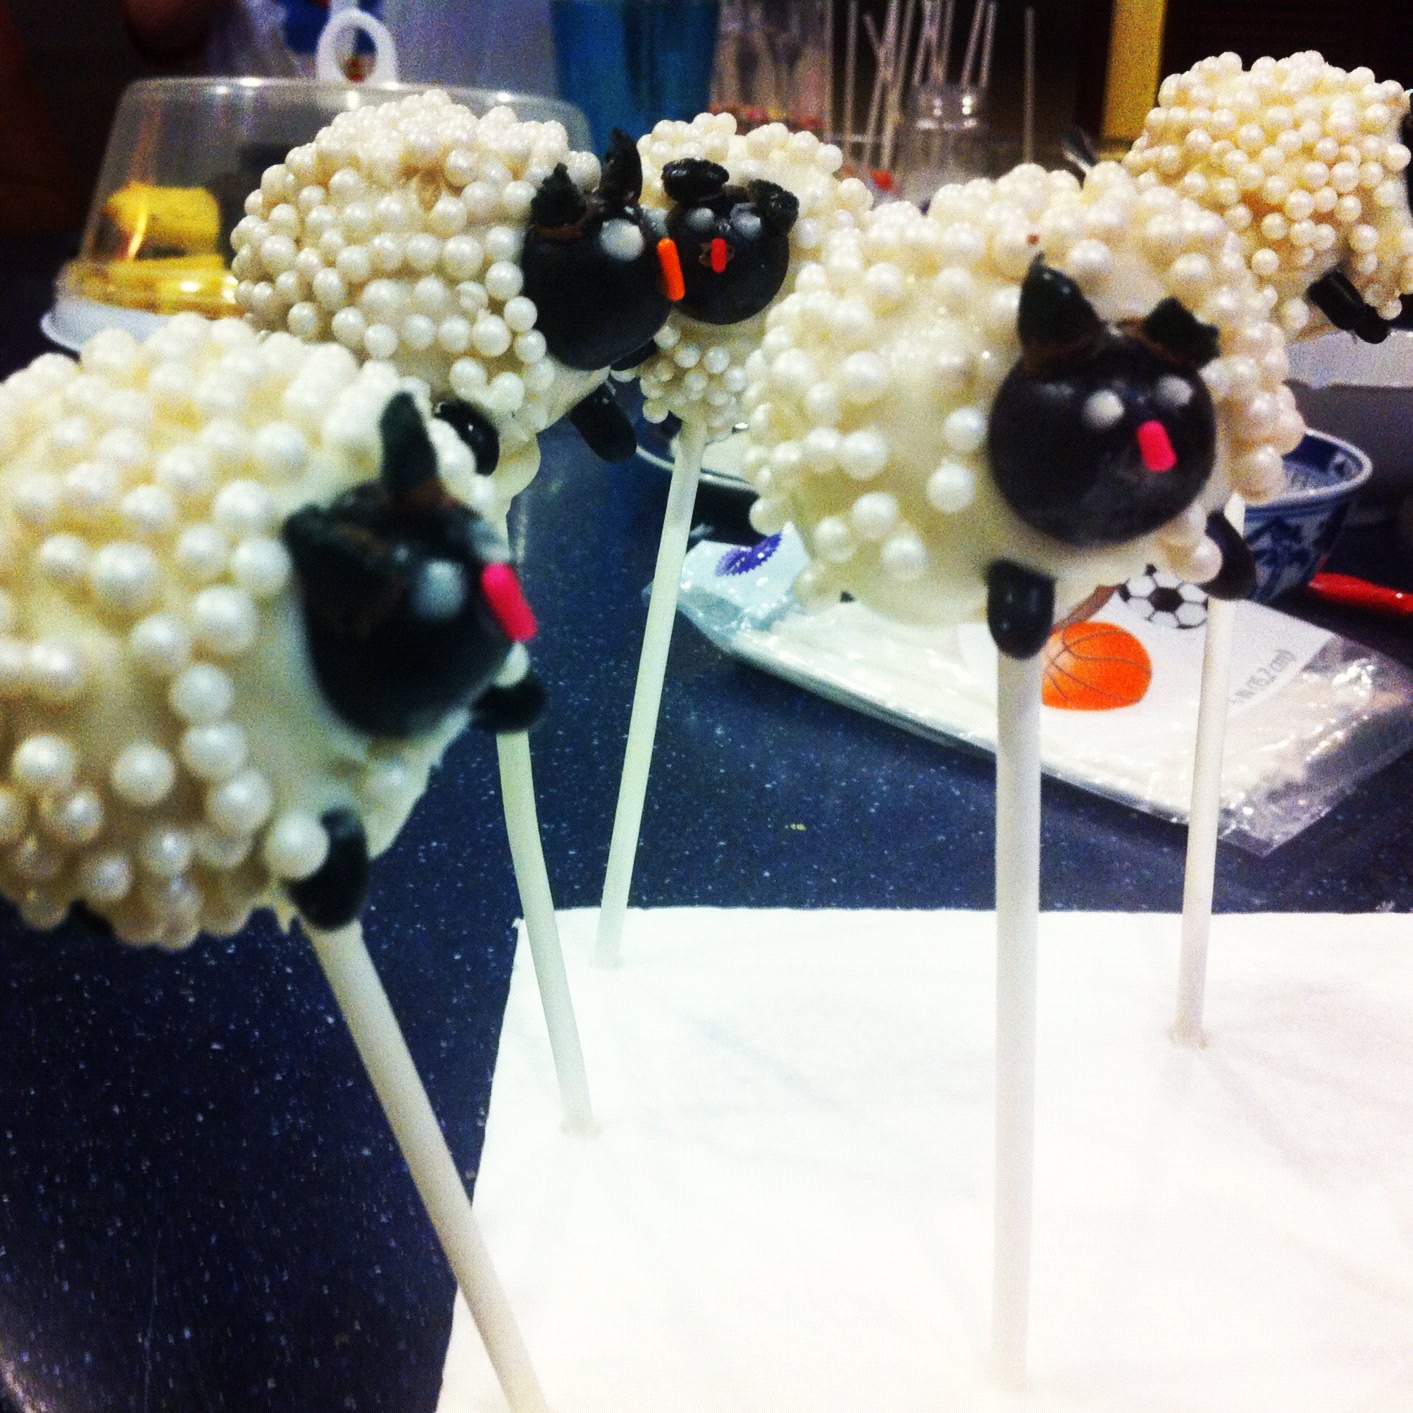 The day before Eid, I made sheep cake pops for an Eid party I was going to. They were a hit!